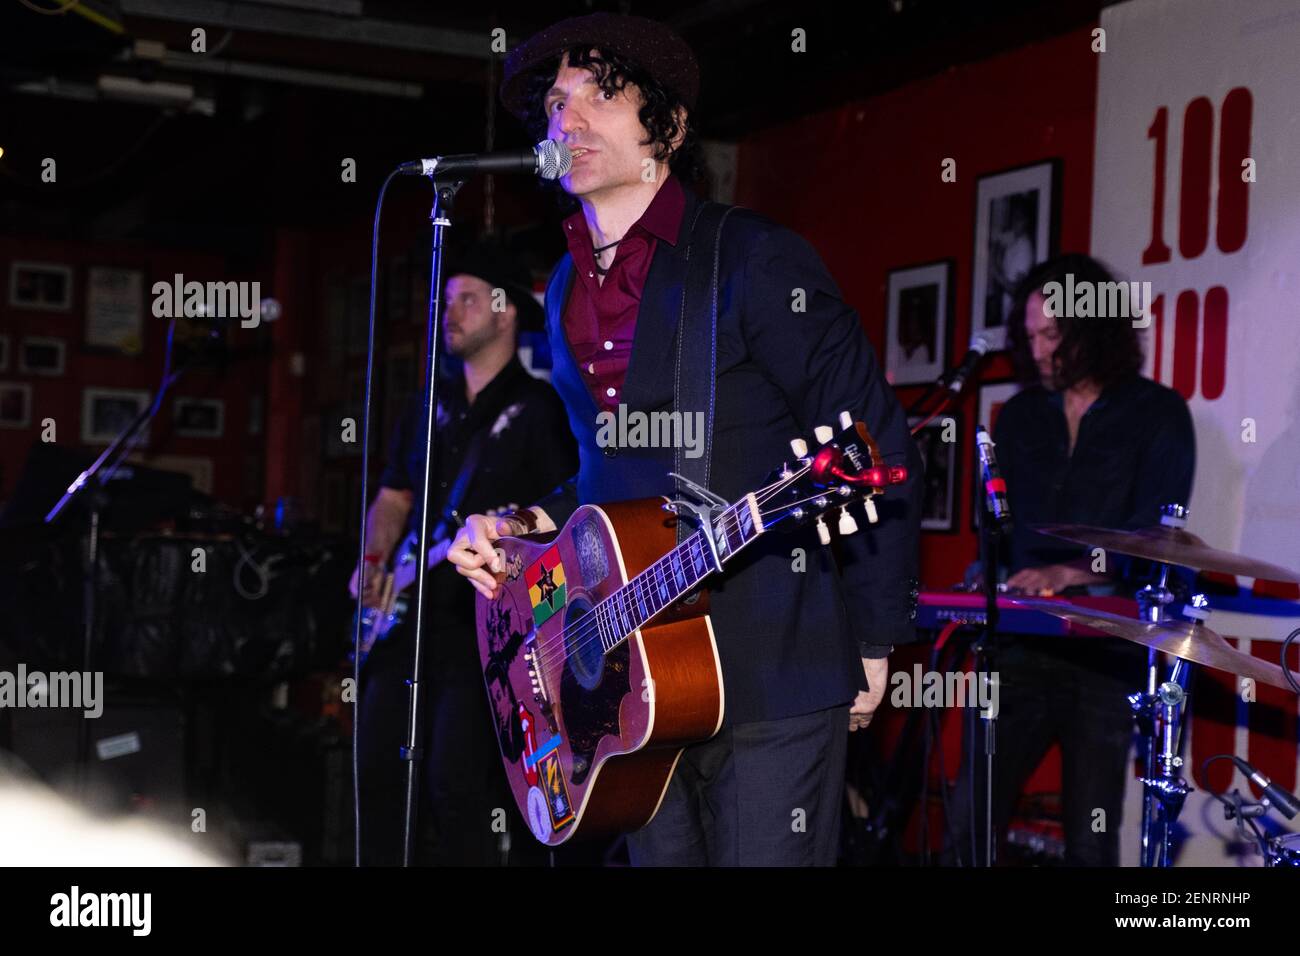 New York singer and song writer Jesse Malin performing live in London to a sold out 100 Club on 17 September 2019, London, England. (Photo by Robin Pope/Sipa USA) Stock Photo